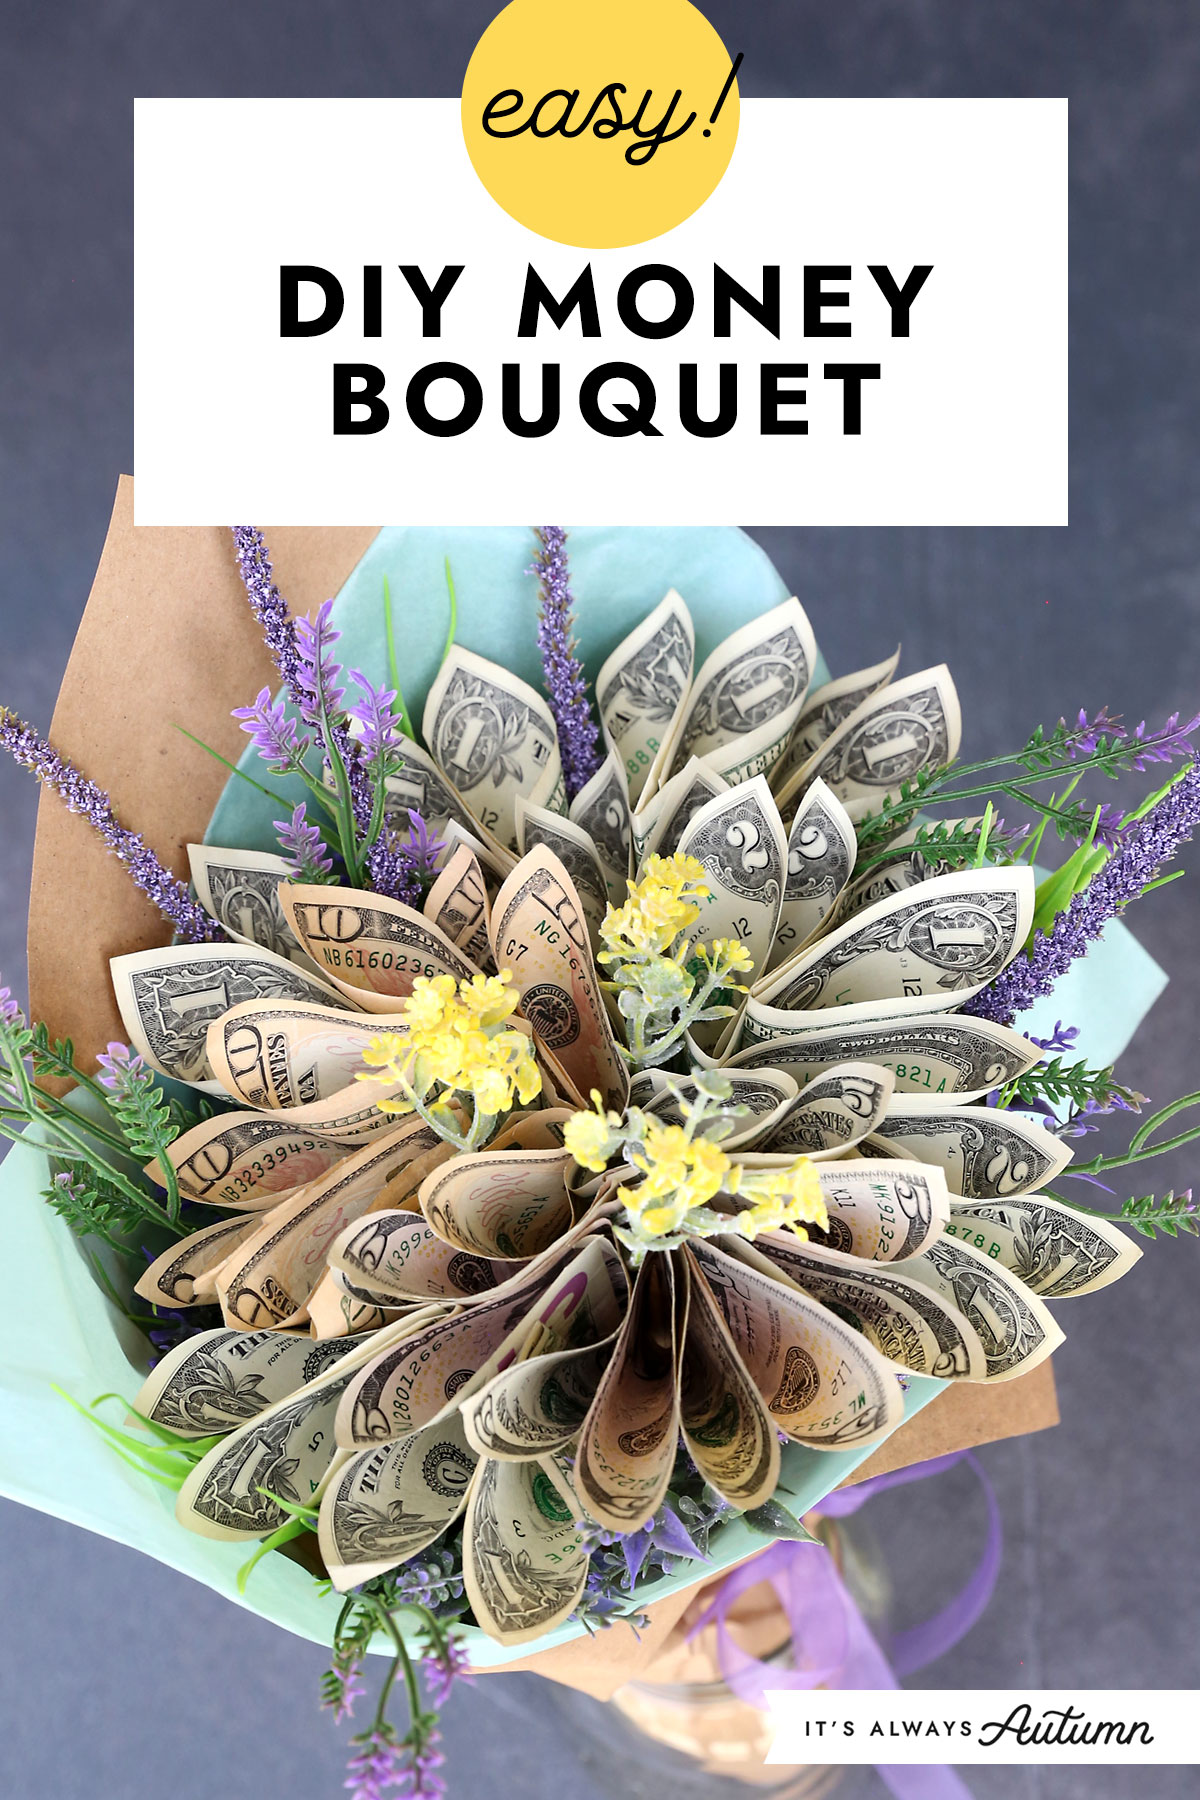 ALL MONEY AND LOVE BOUQUET